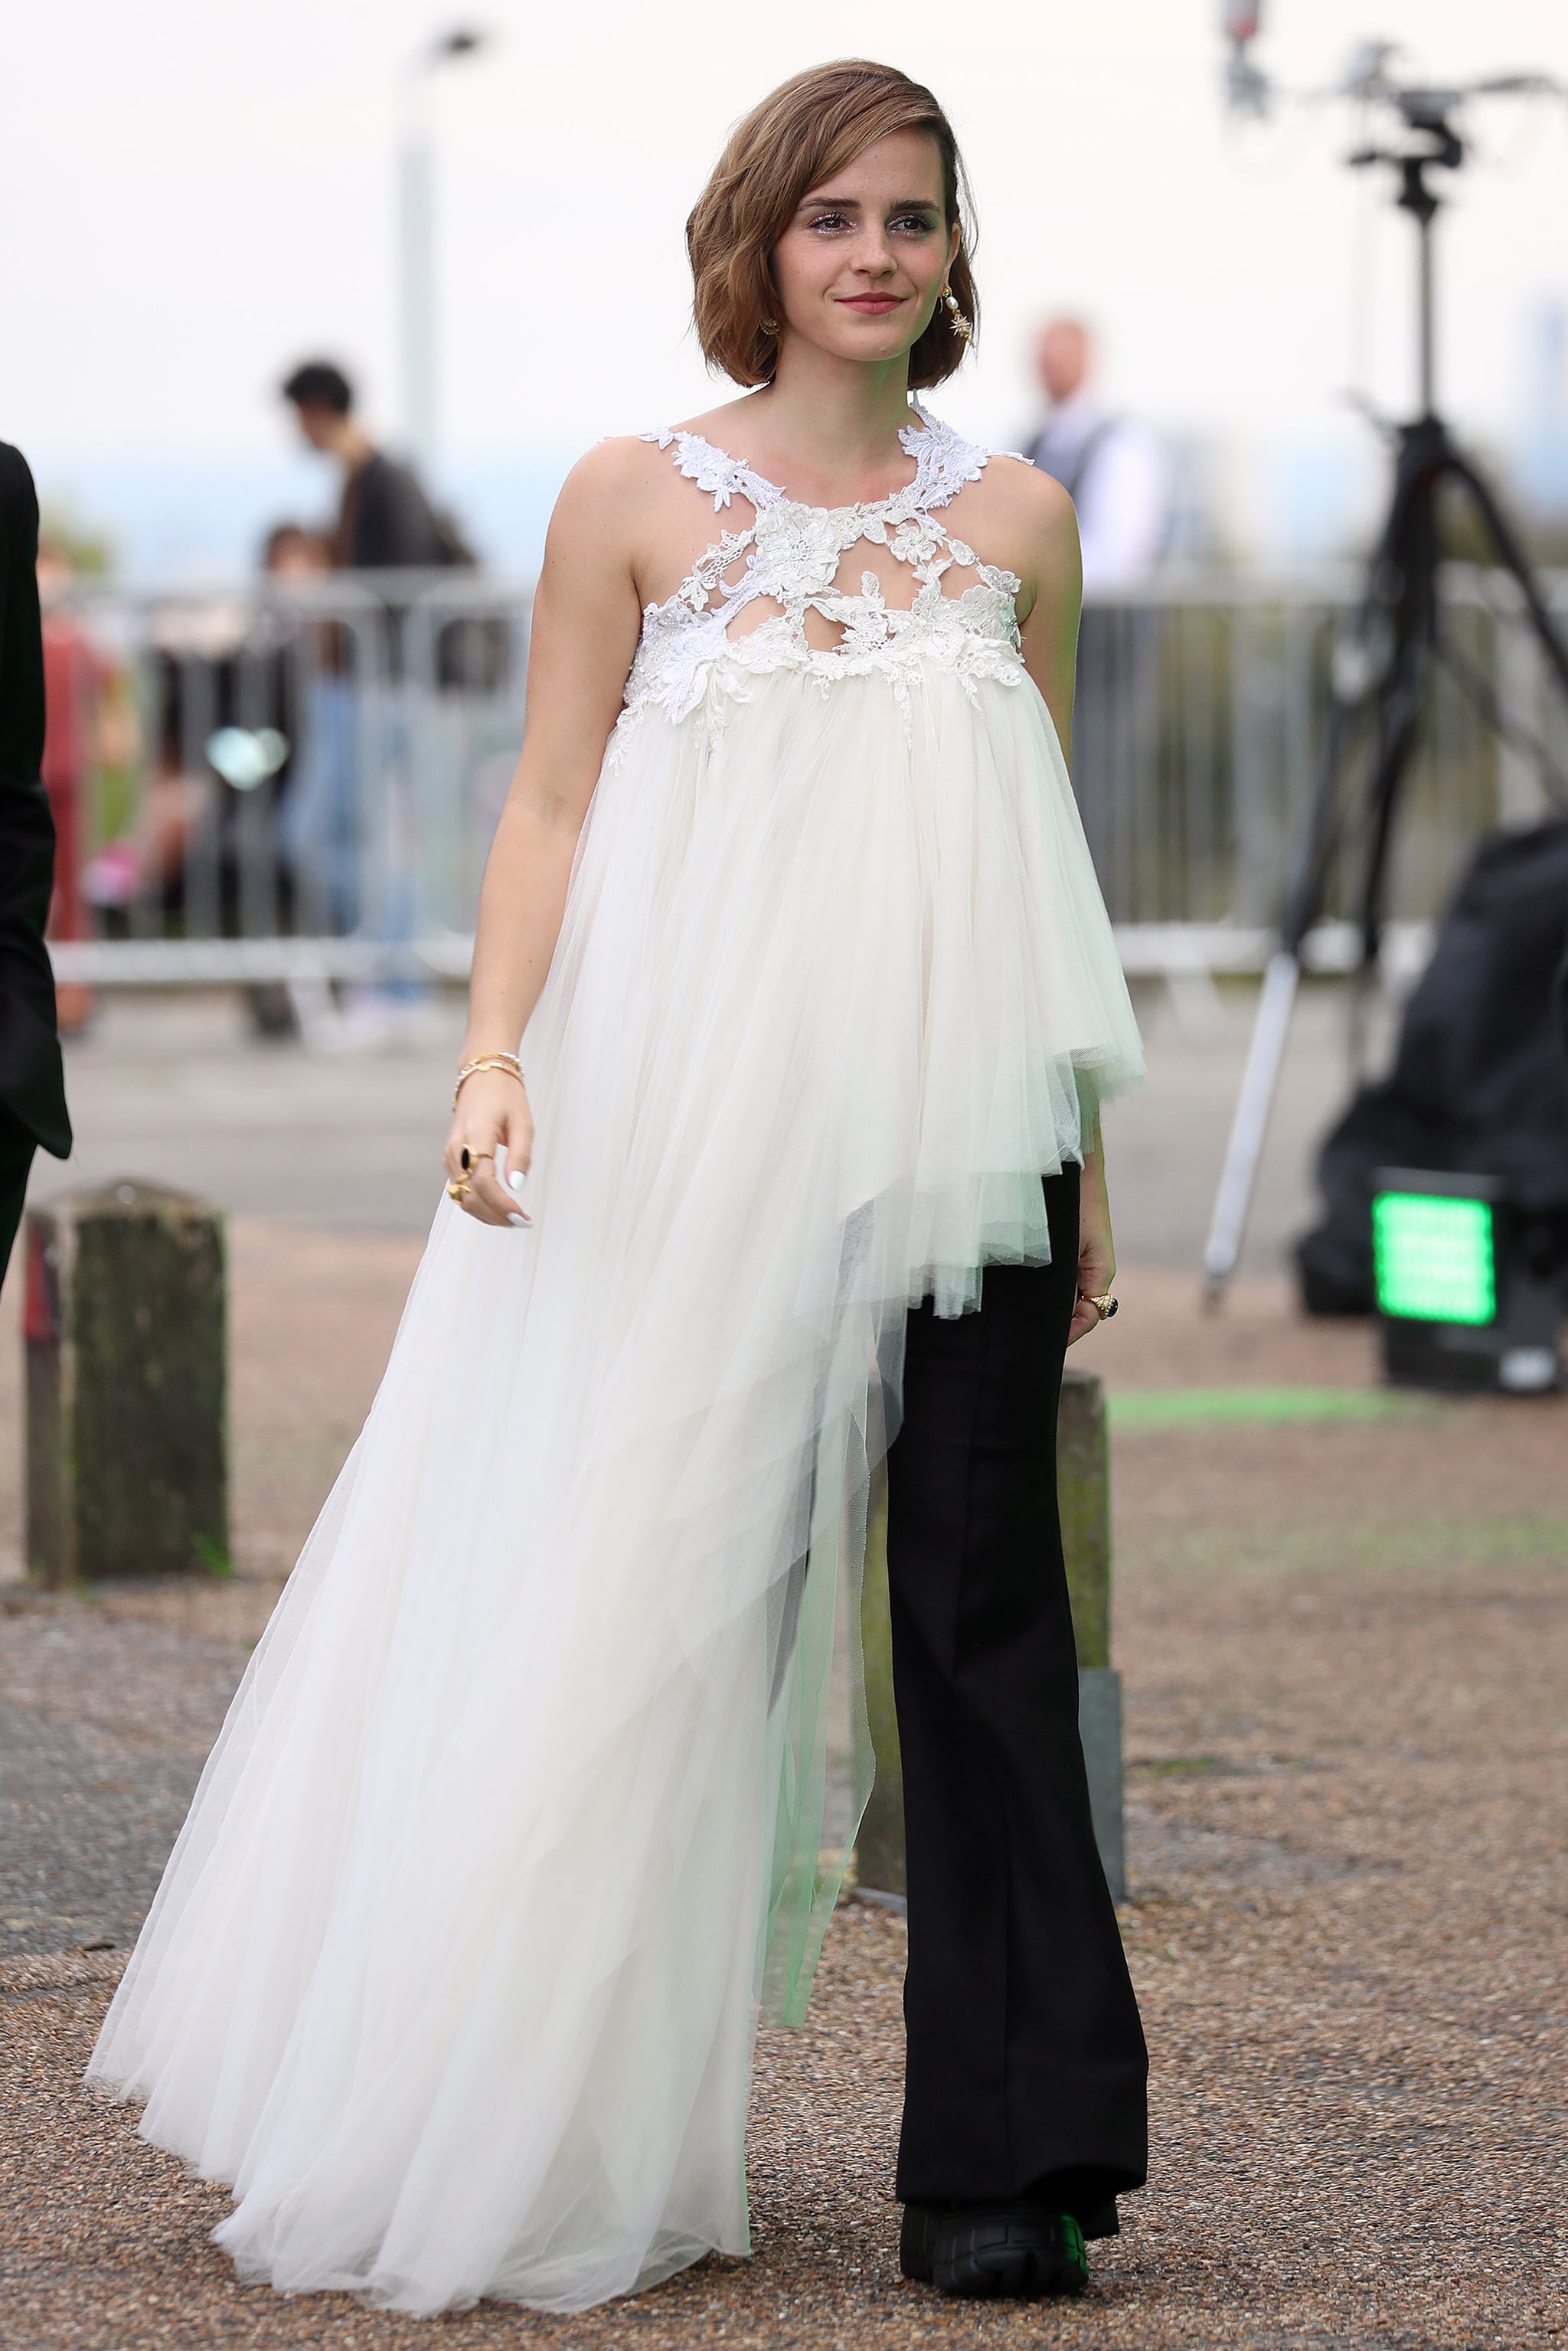 Emma Watson wears gown made from recycled wedding dresses